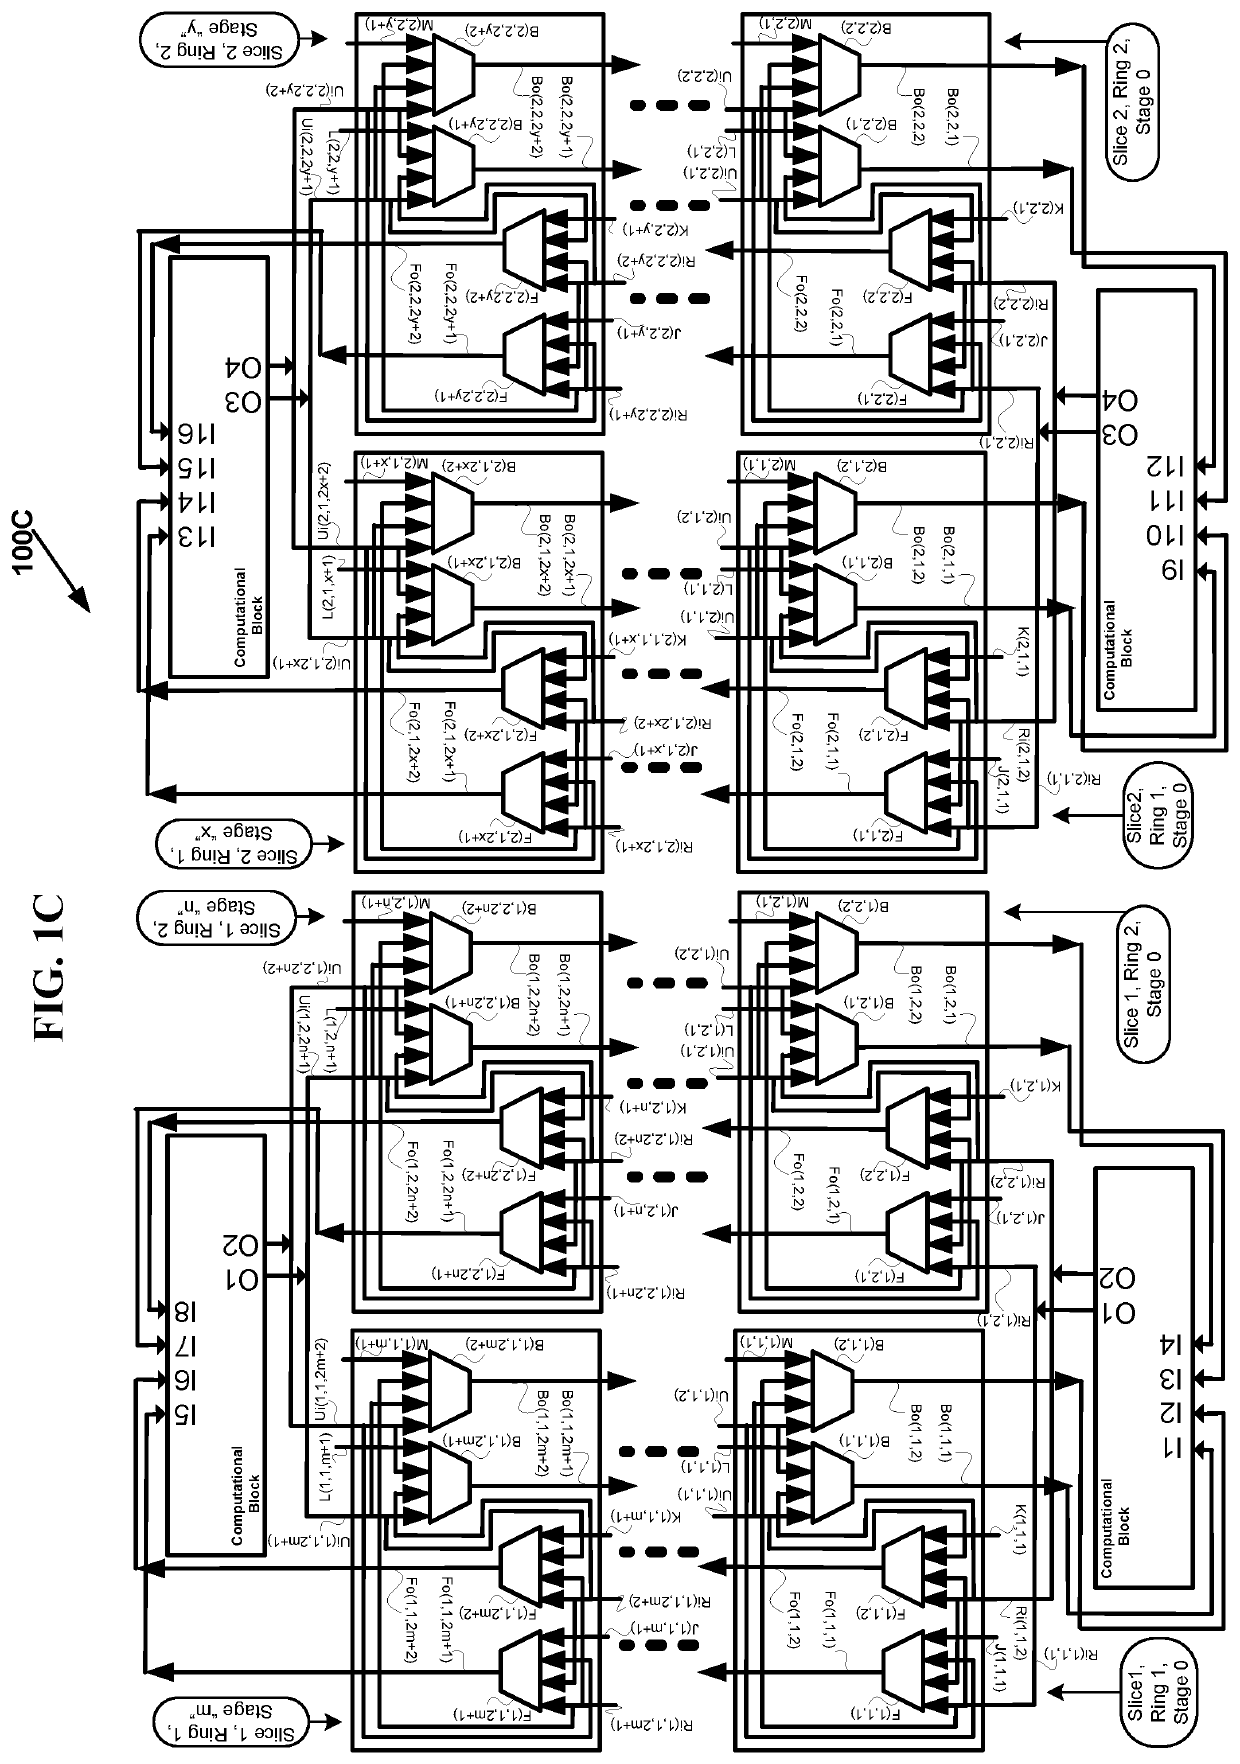 Fast scheduling and optimization of multi-stage hierarchical networks